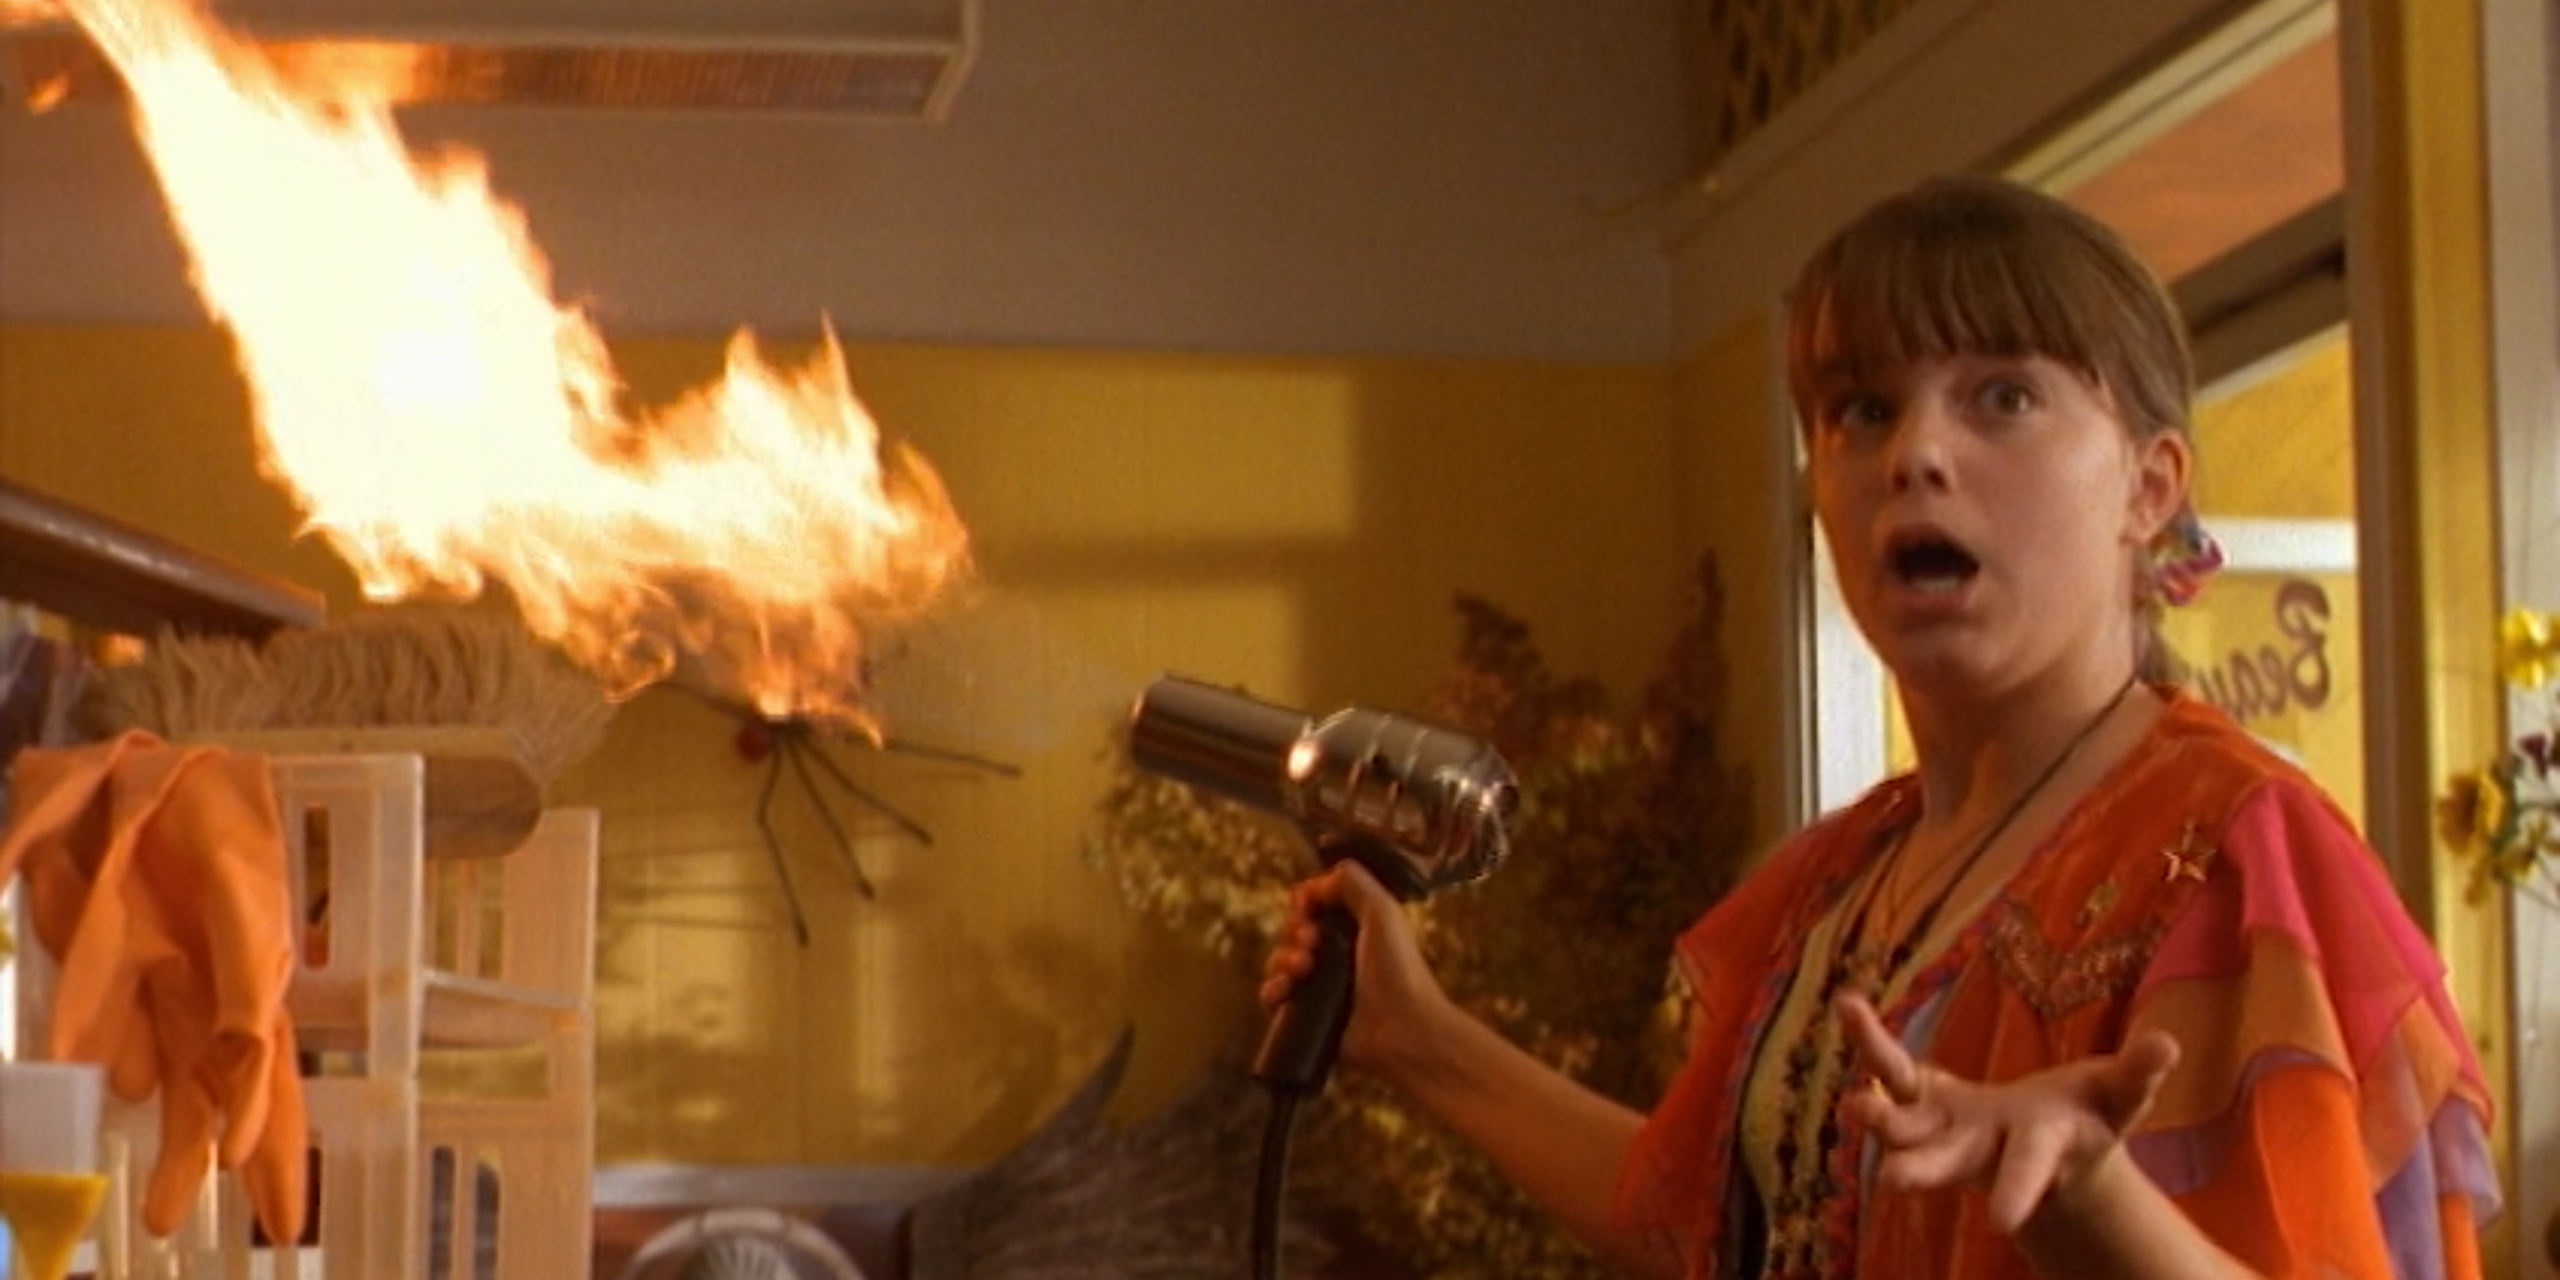 Marnie, in shock as a hairdryer shoots flames in Halloweentown